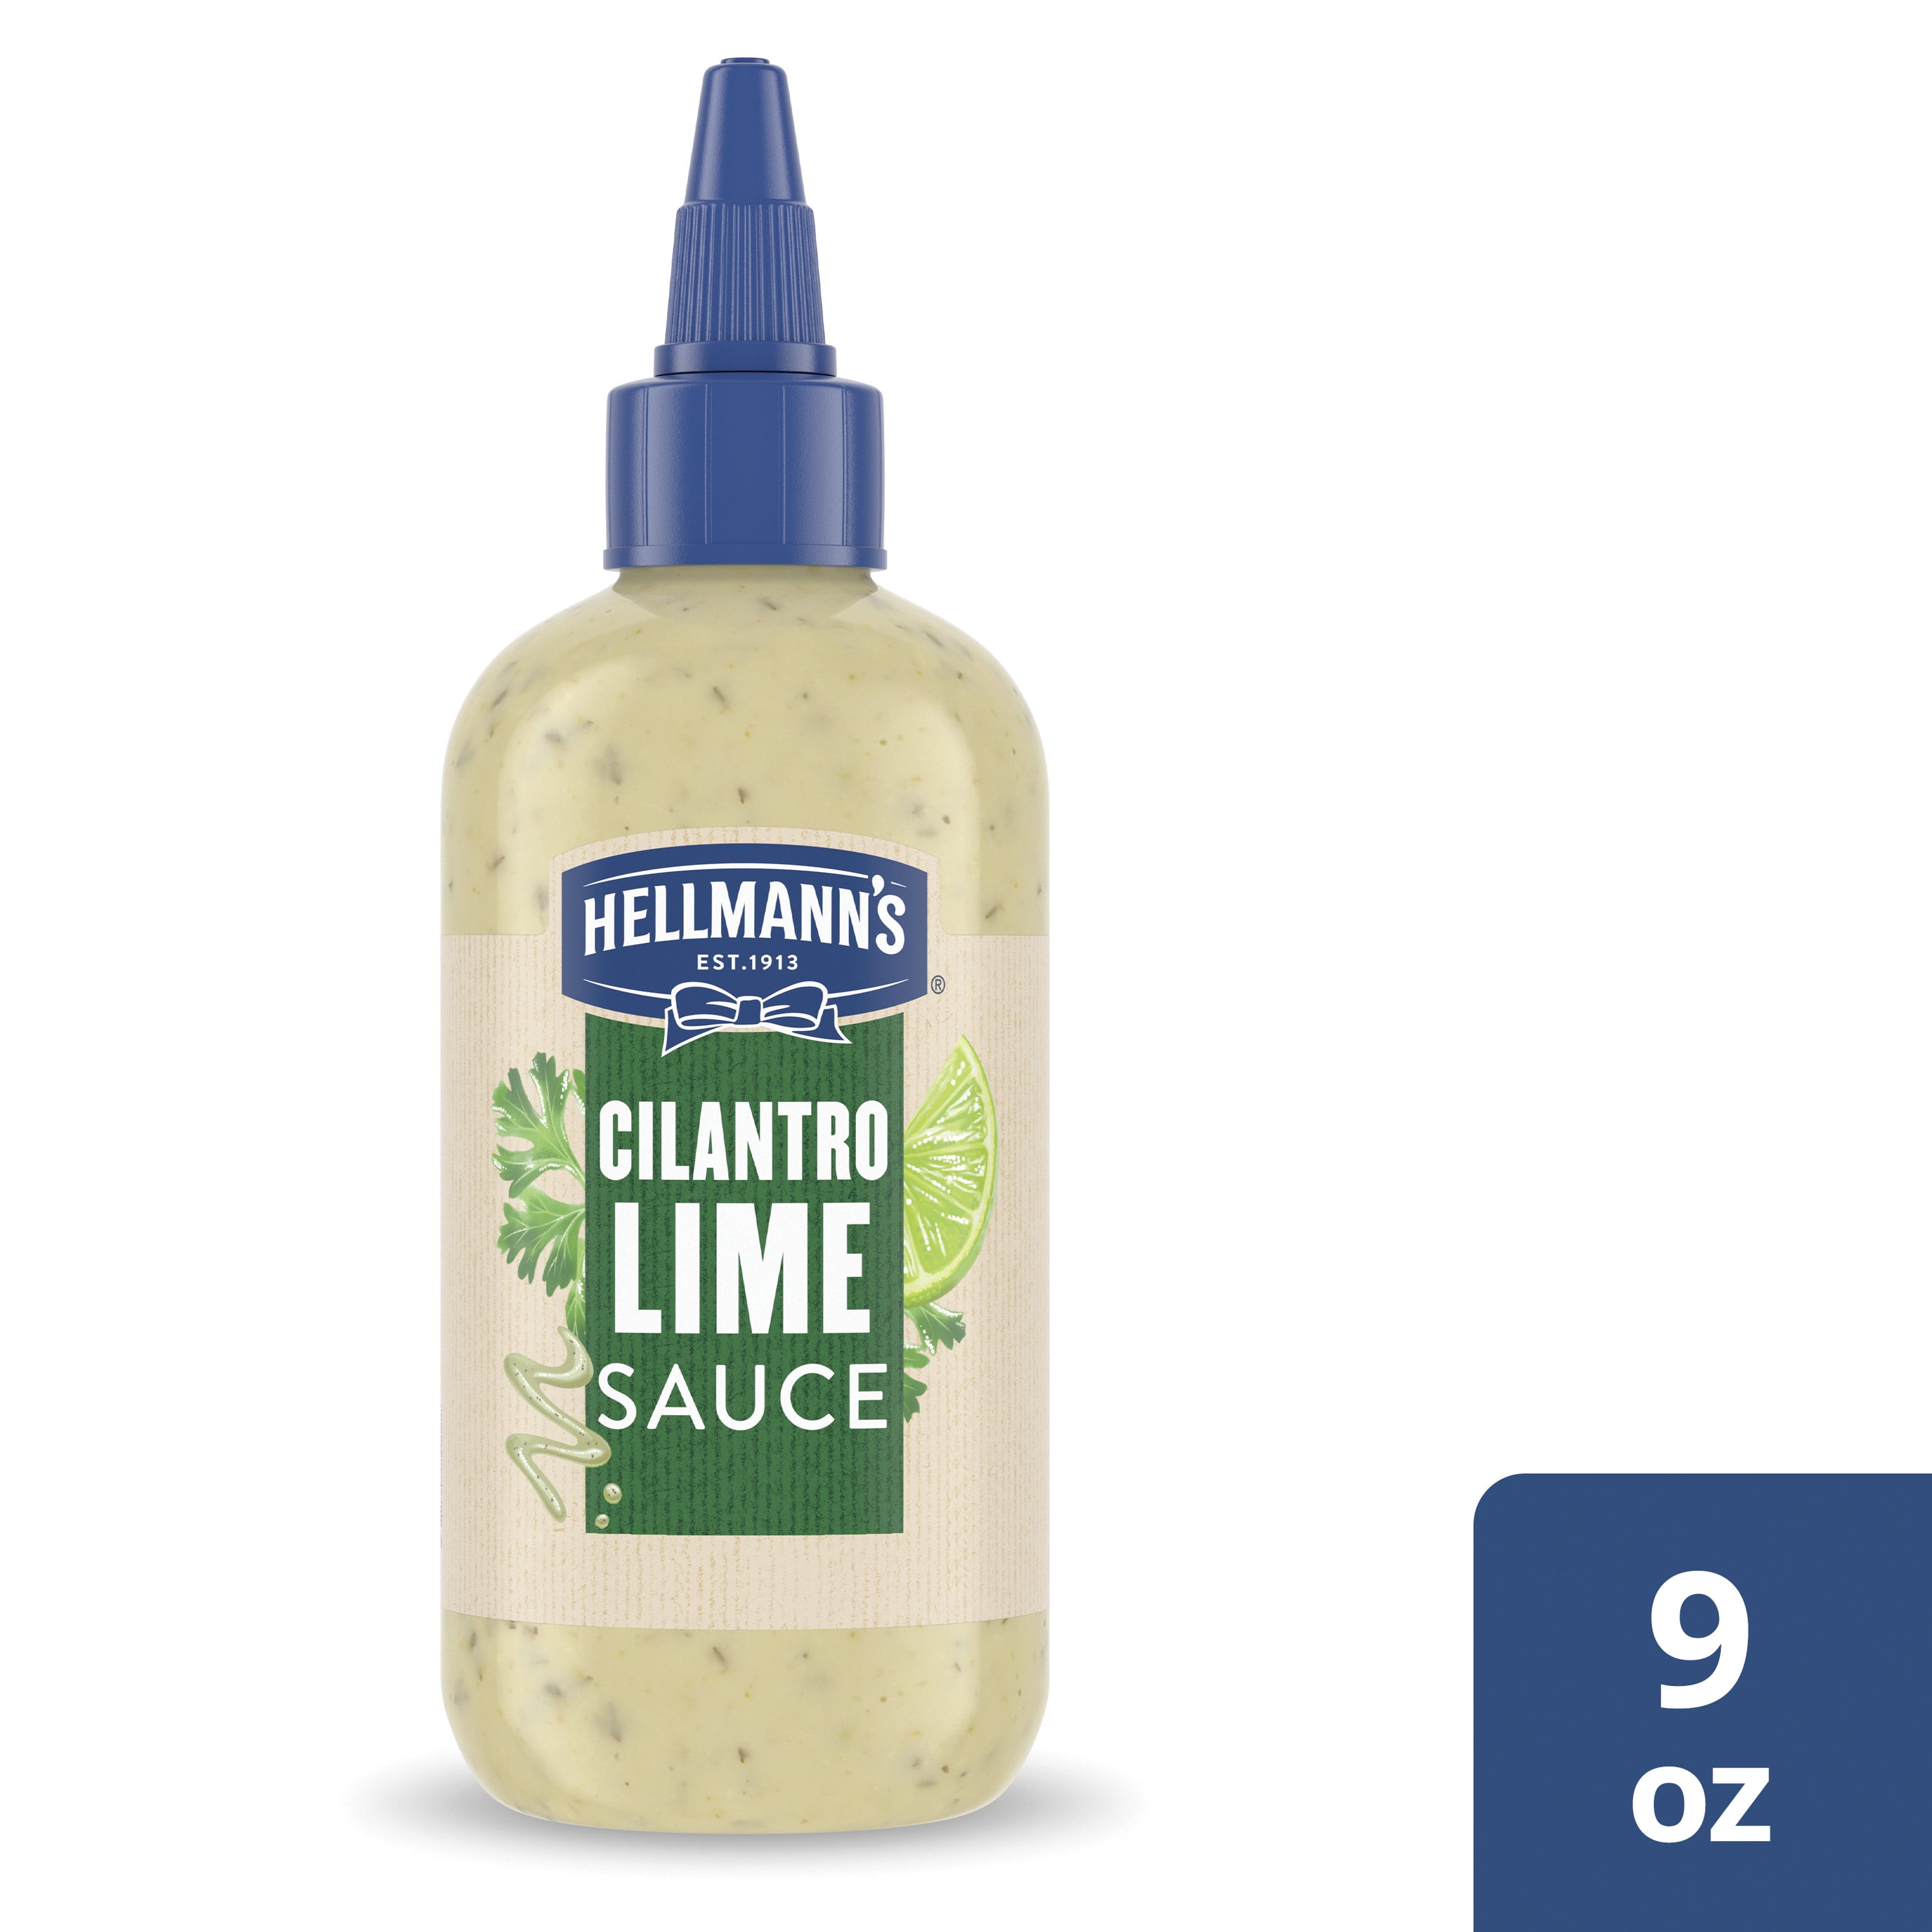 Hellmann's Sauce Dip and Dressing Cilantro Lime Gluten Free, Dairy Free, No Artificial Flavors, 9 oz